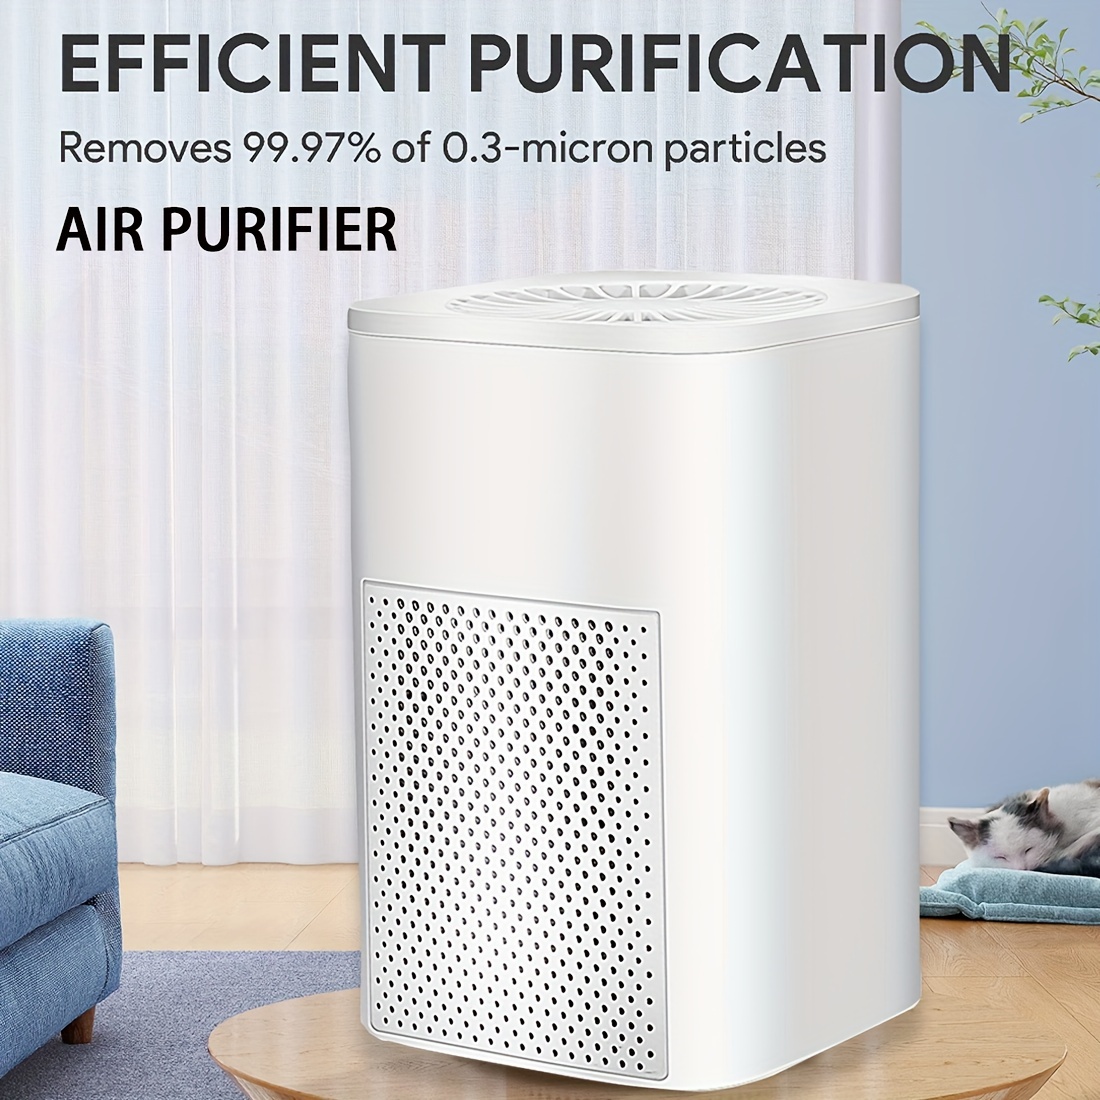 LEVOIT Air Purifier for Home Bedroom, HEPA Air Fresheners Filter, Small  Room Air Cleaner with Fragrance Sponge for Smoke, Allergies, Pet Dander,  Odor, Dust Remover, Office, Desktop, Table Top (2 Pack) 